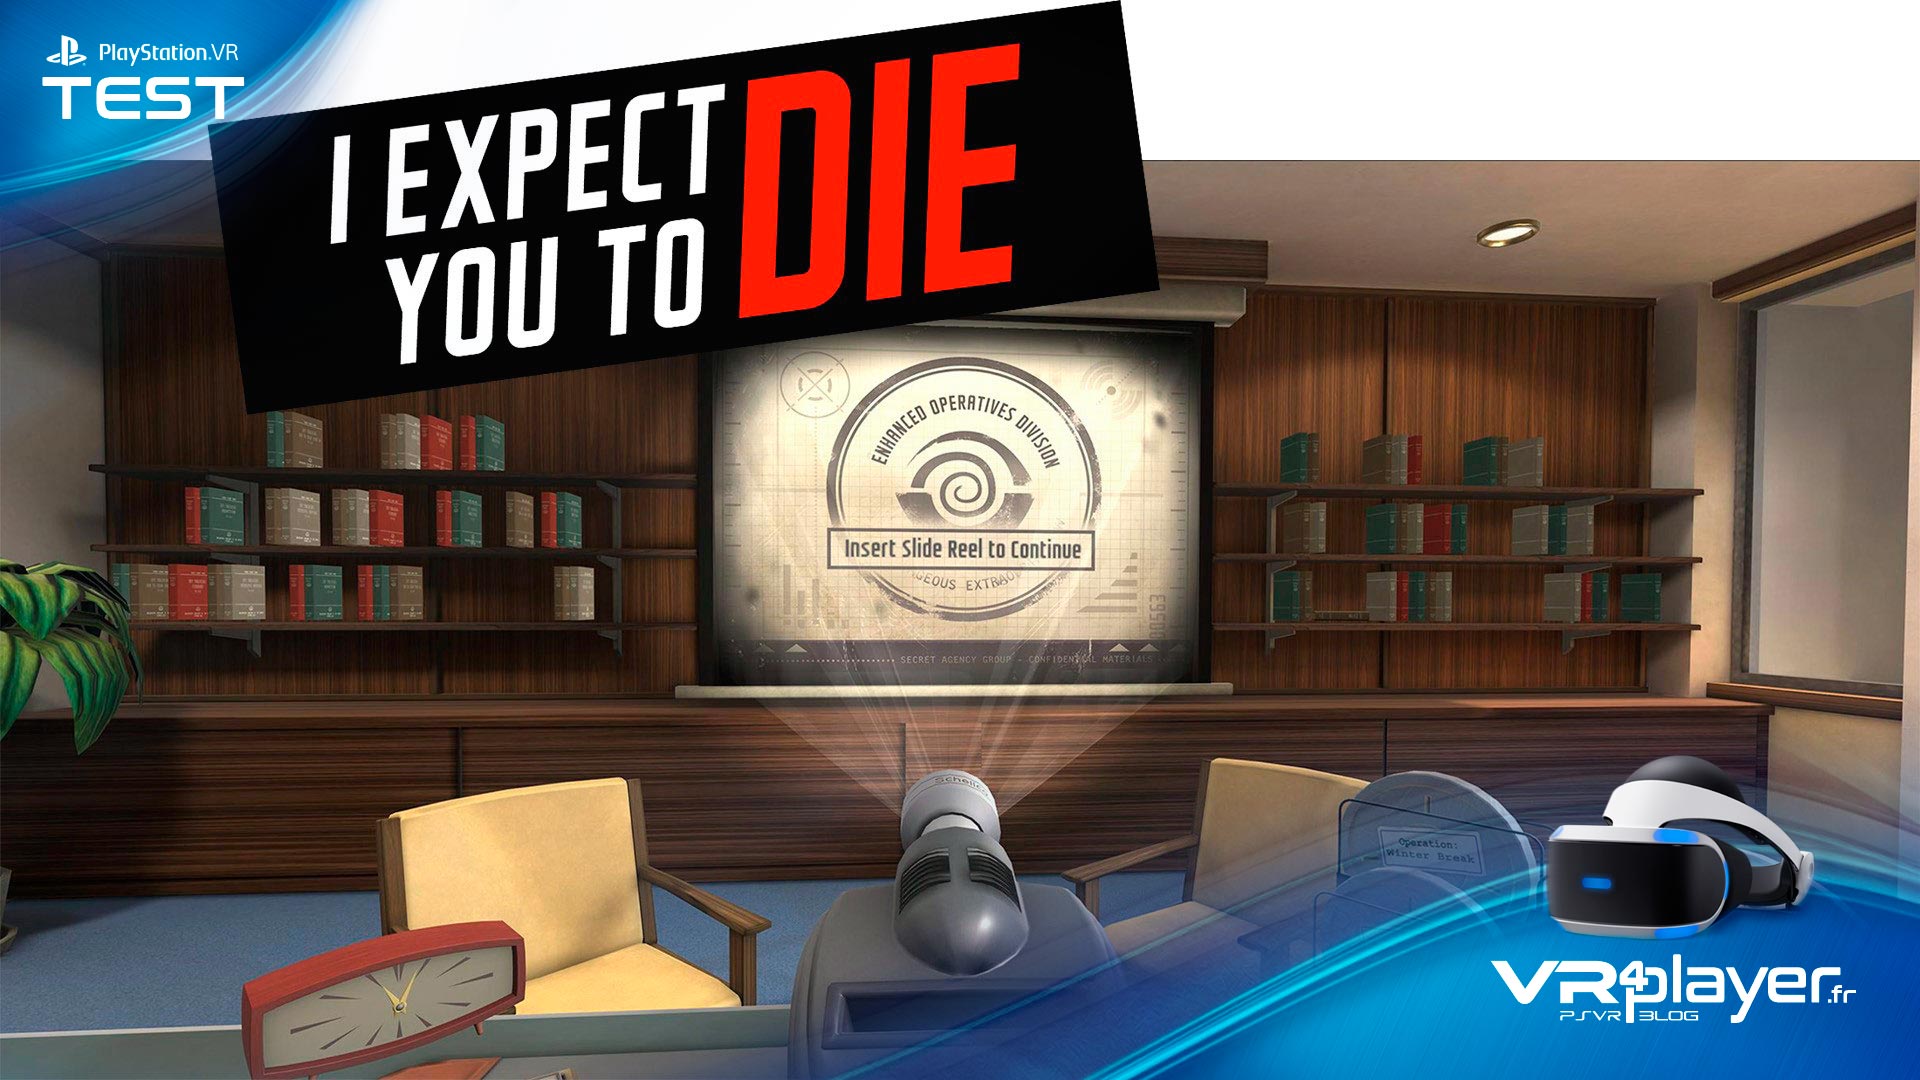 I Expect you to Die VR4player Test